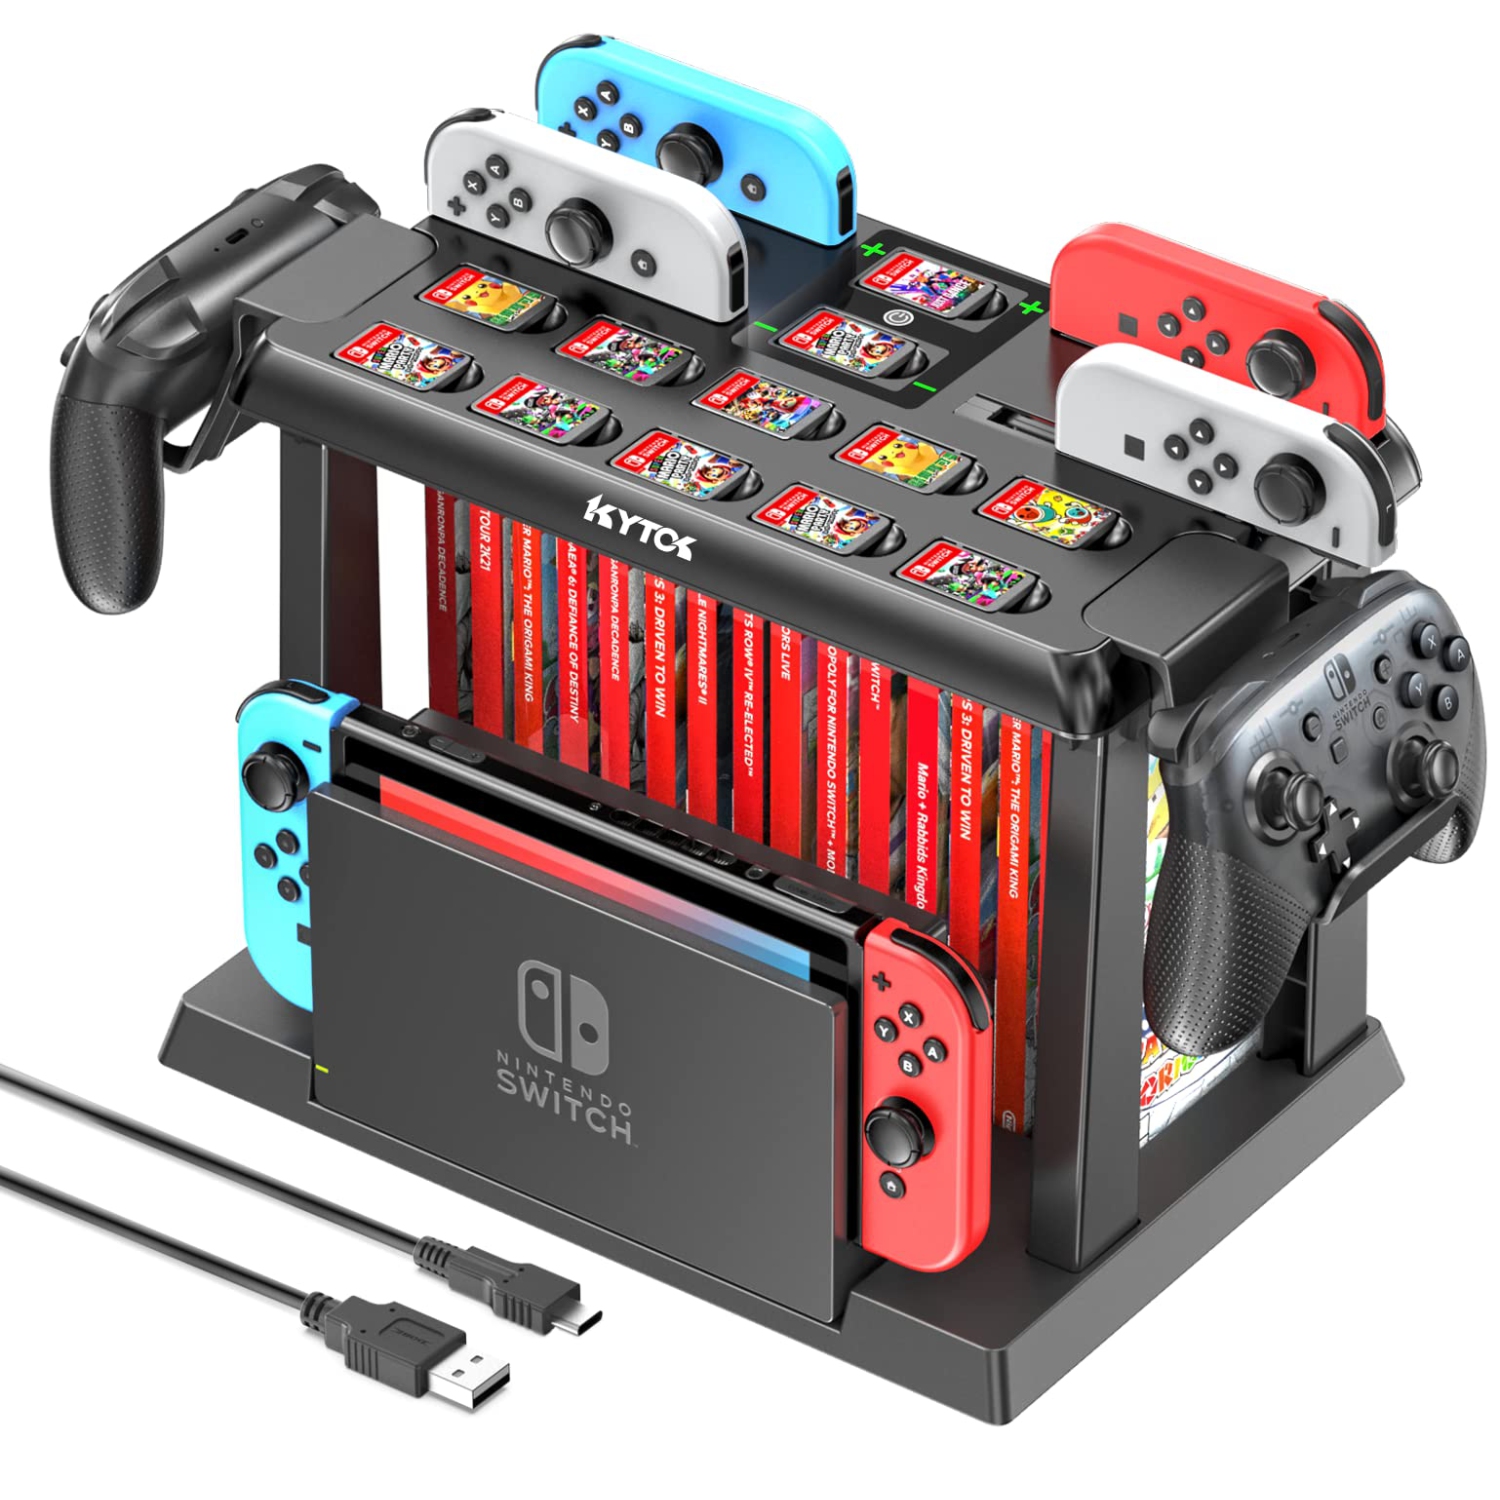 Switch Games Organizer Station with Controller Charger, Charging Dock for Nintendo Switch & OLED Joycons, Kytok Switch Stora